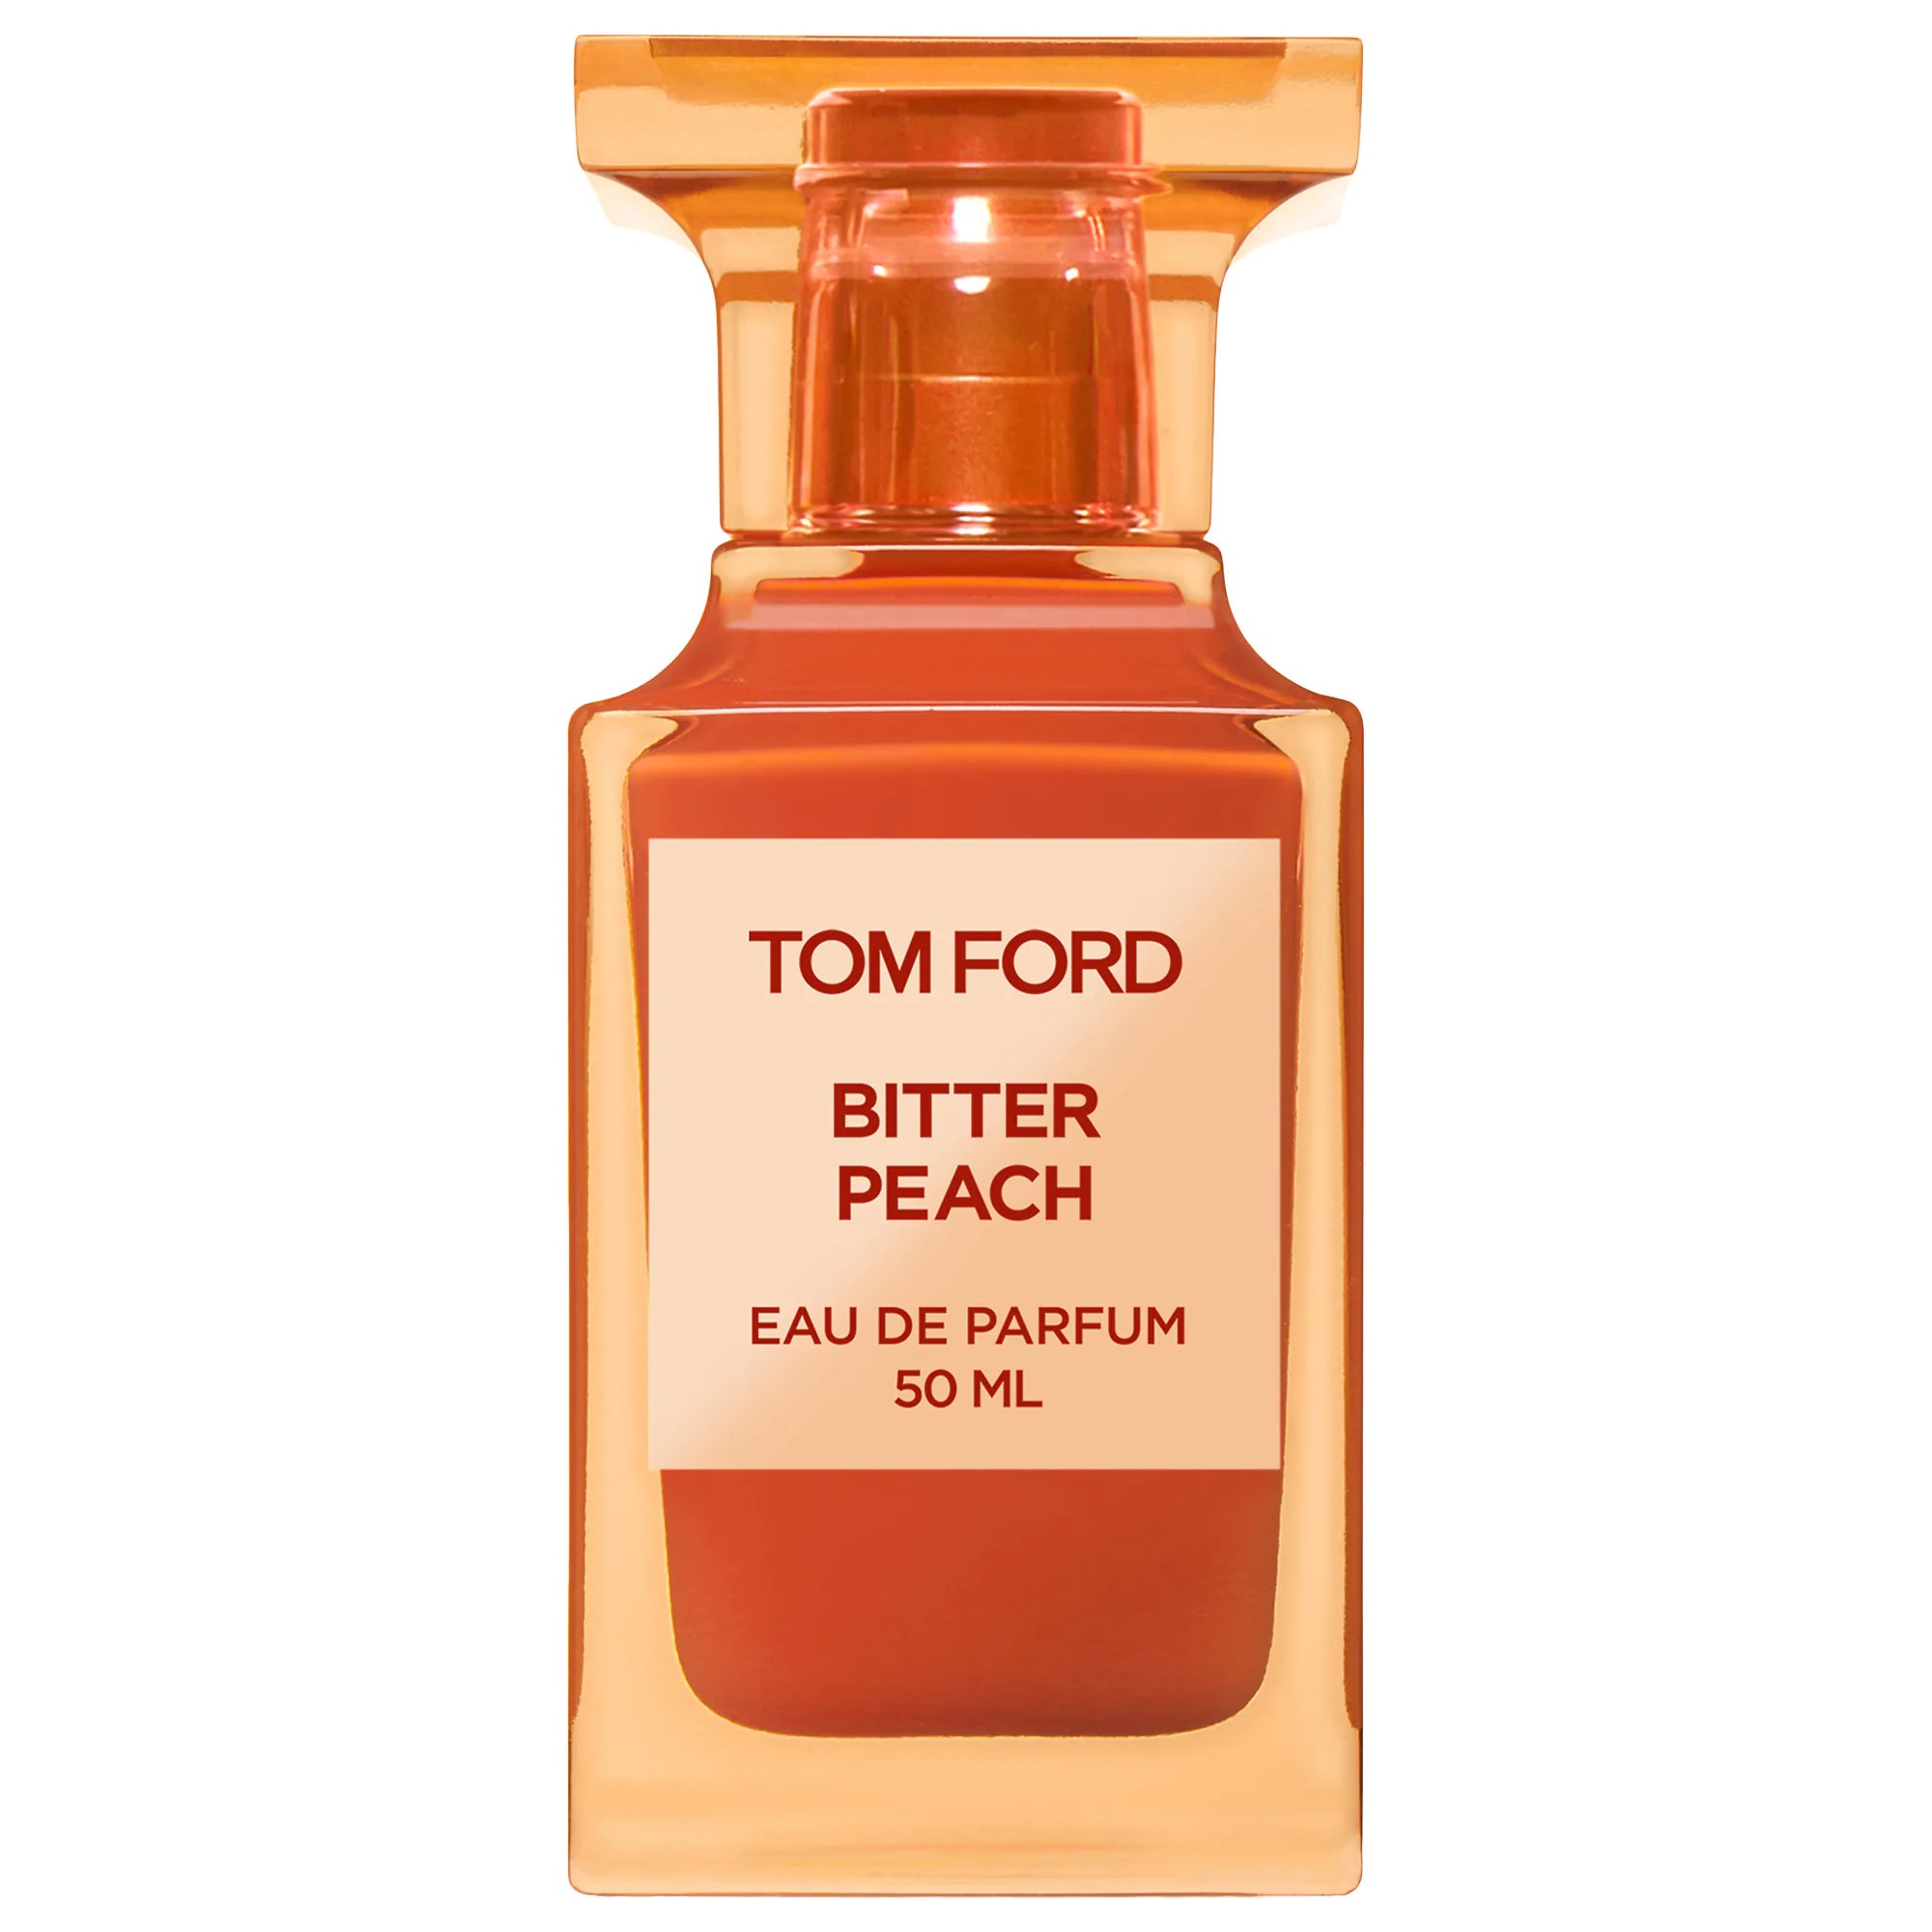 nuoc-hoa-tom-ford-bitter-peach-orchard.vn-1